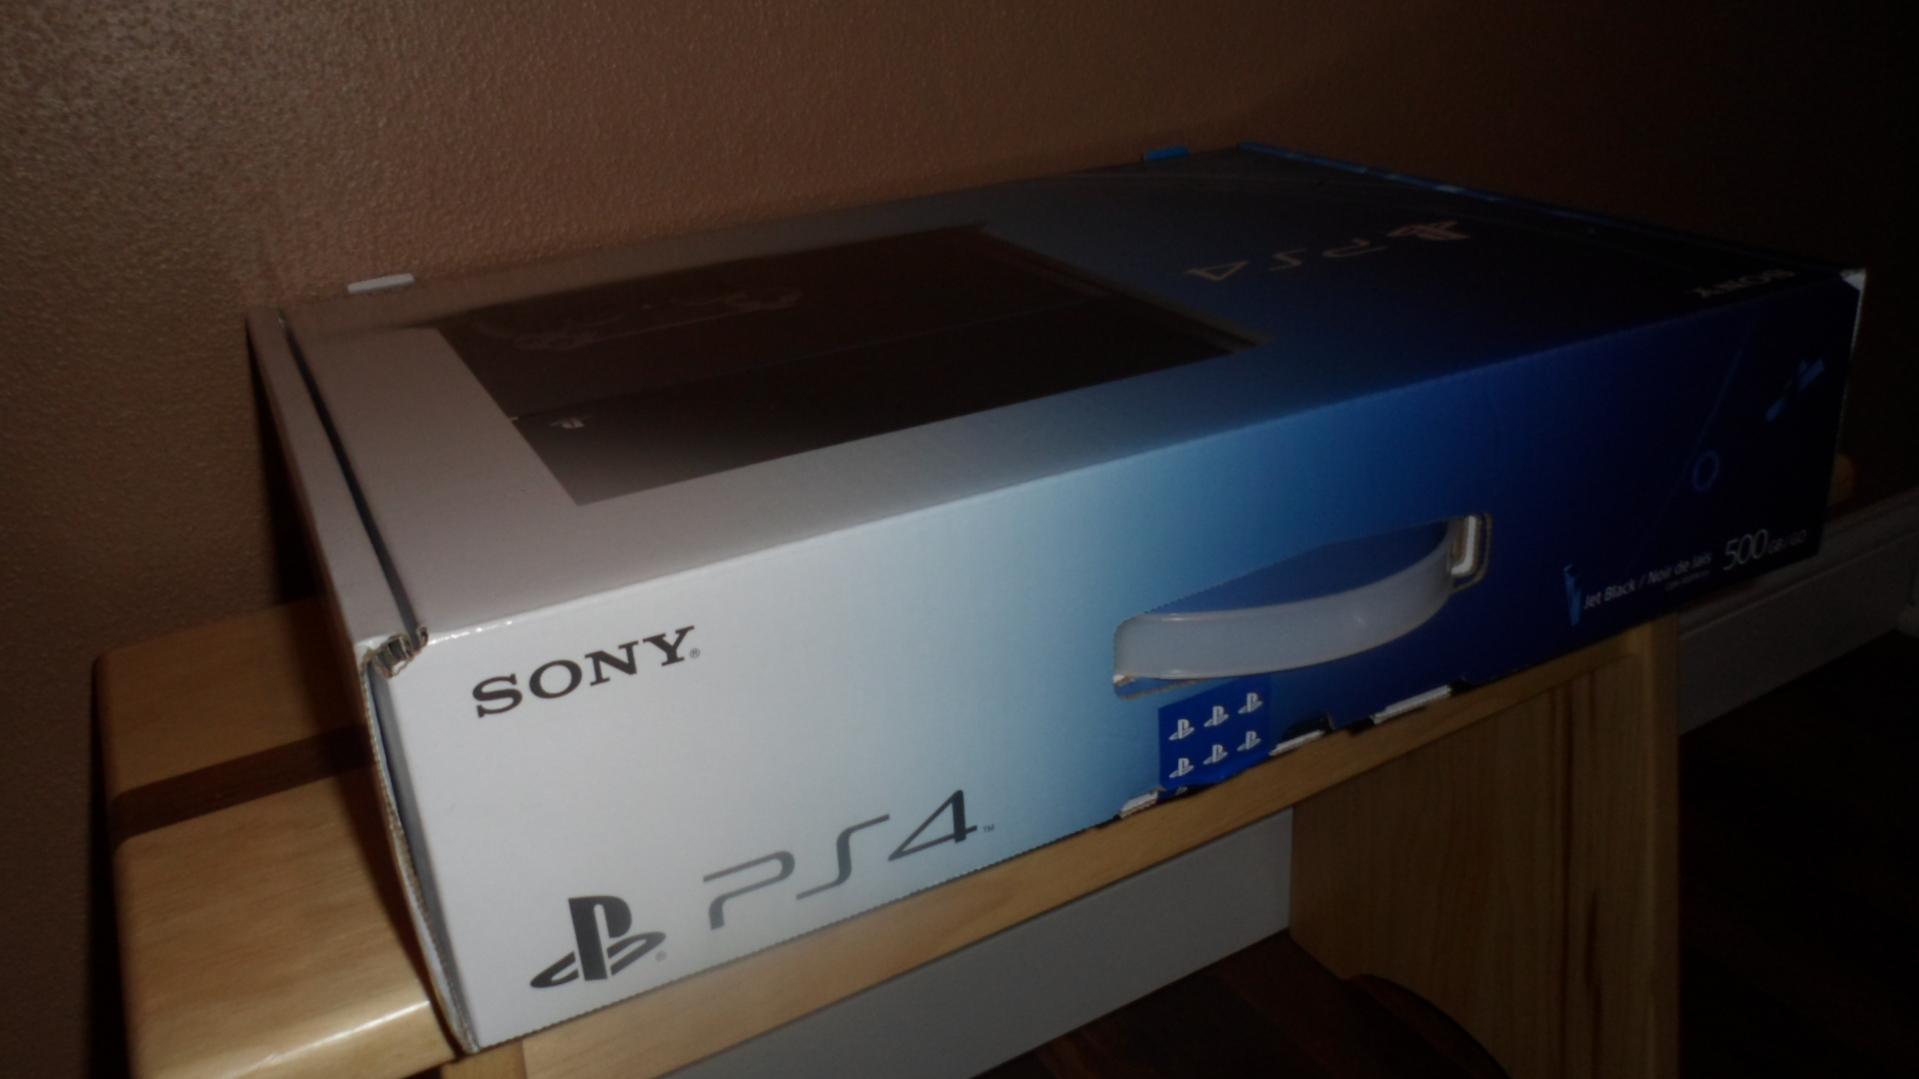 ps4 in a box